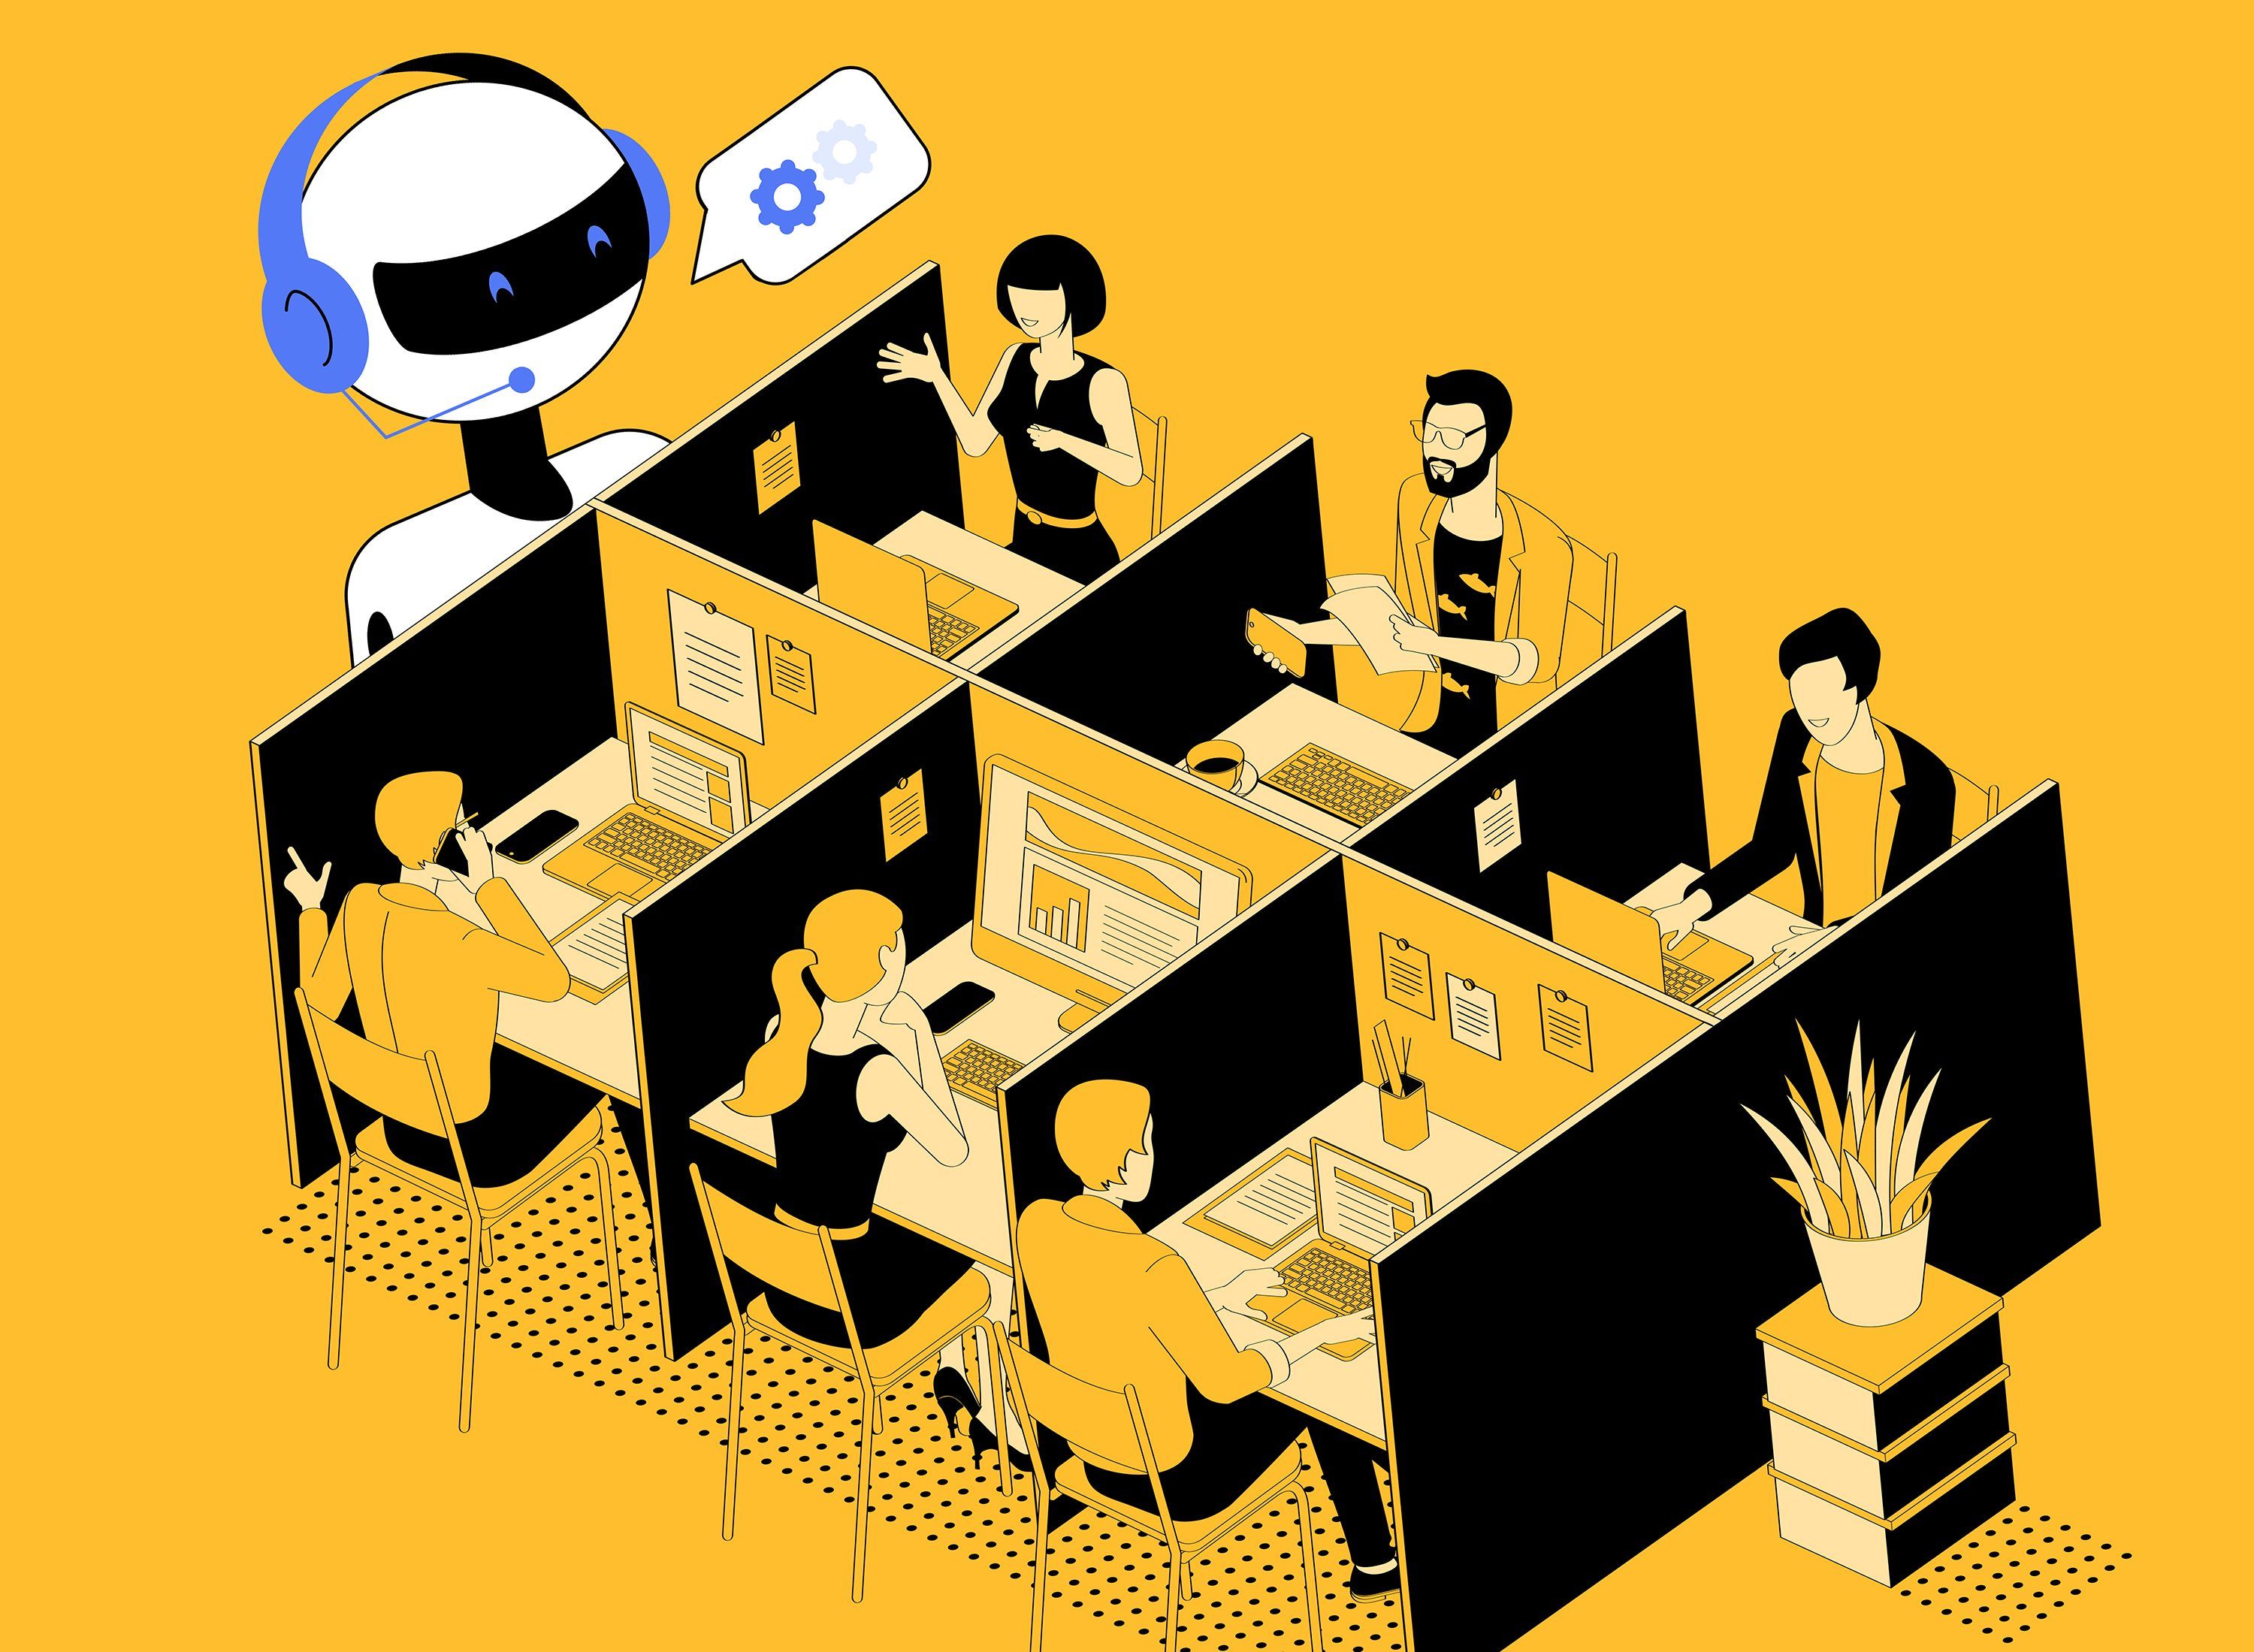 An illustration shows six office workers in cubicles in yellow and black, and a large white, black and blue chat bot looming over them with a speech bubble showing two gear icons.